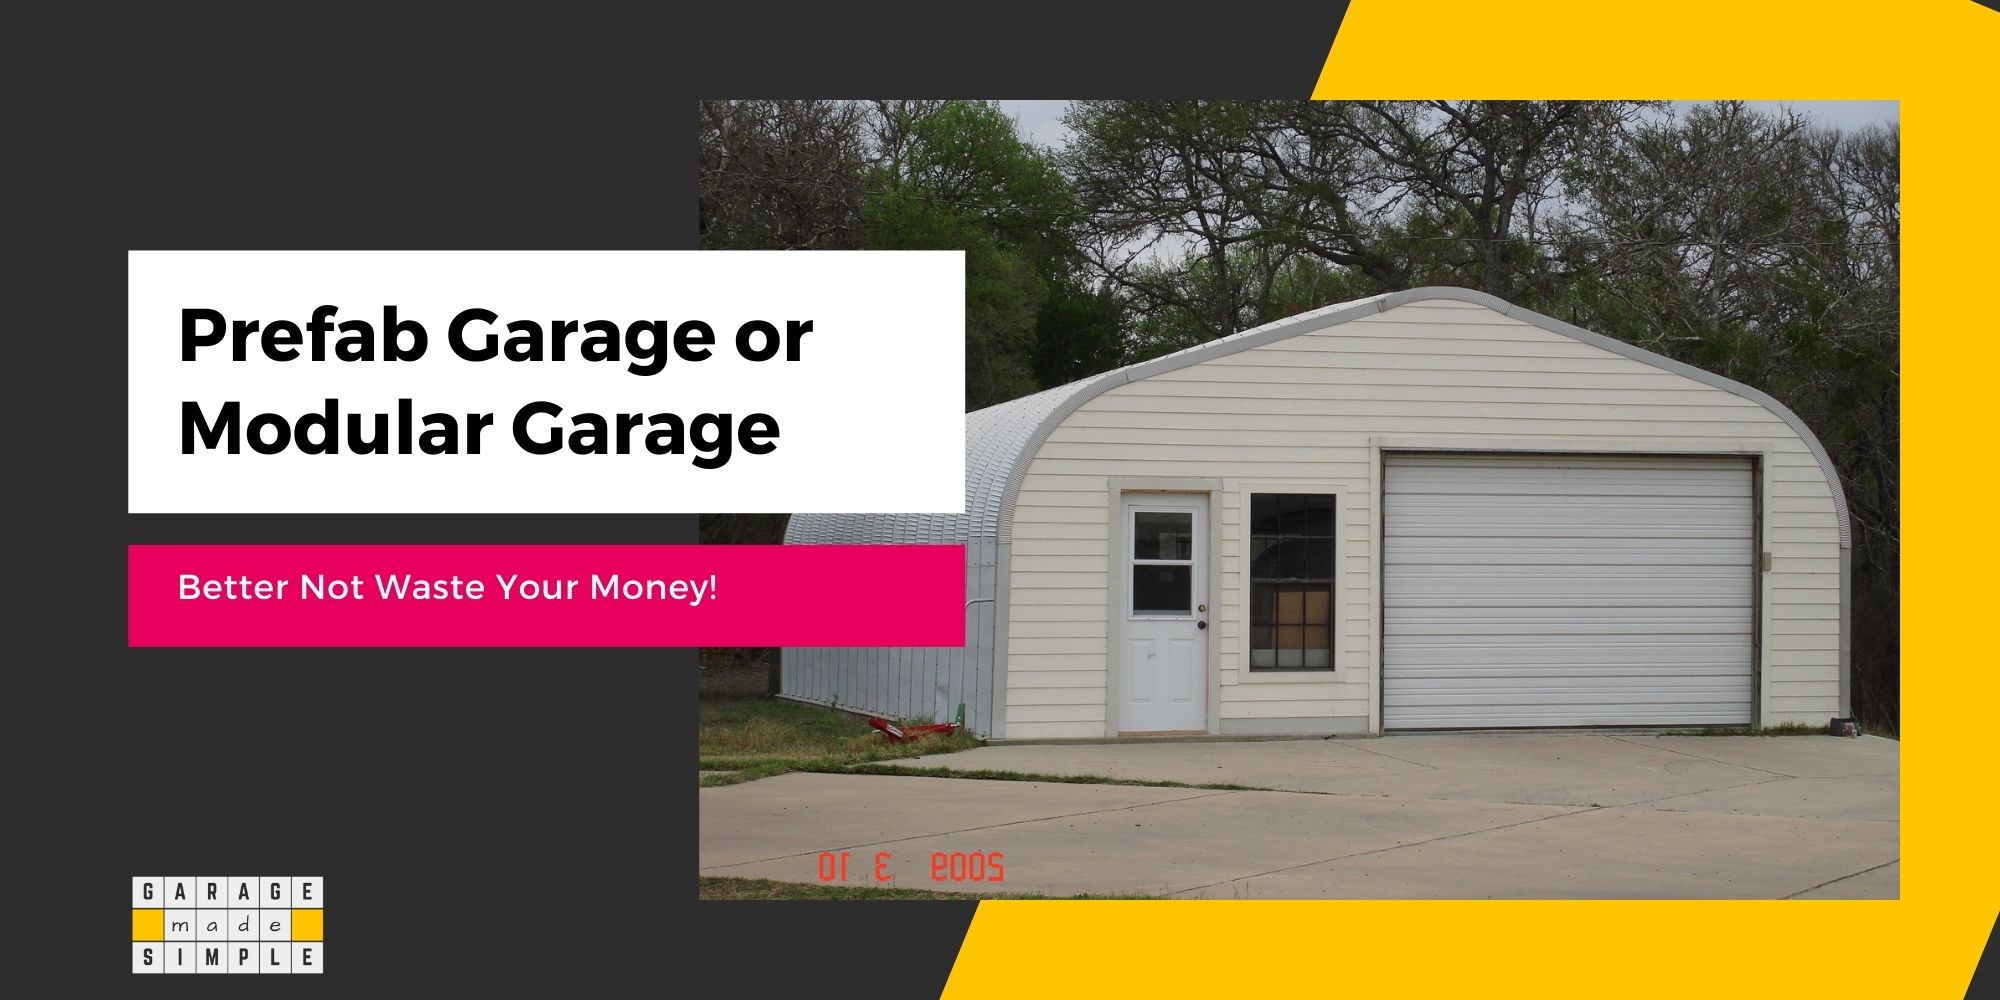 Better Not Waste Money On A Prefab Garage. (Here’s Why!)